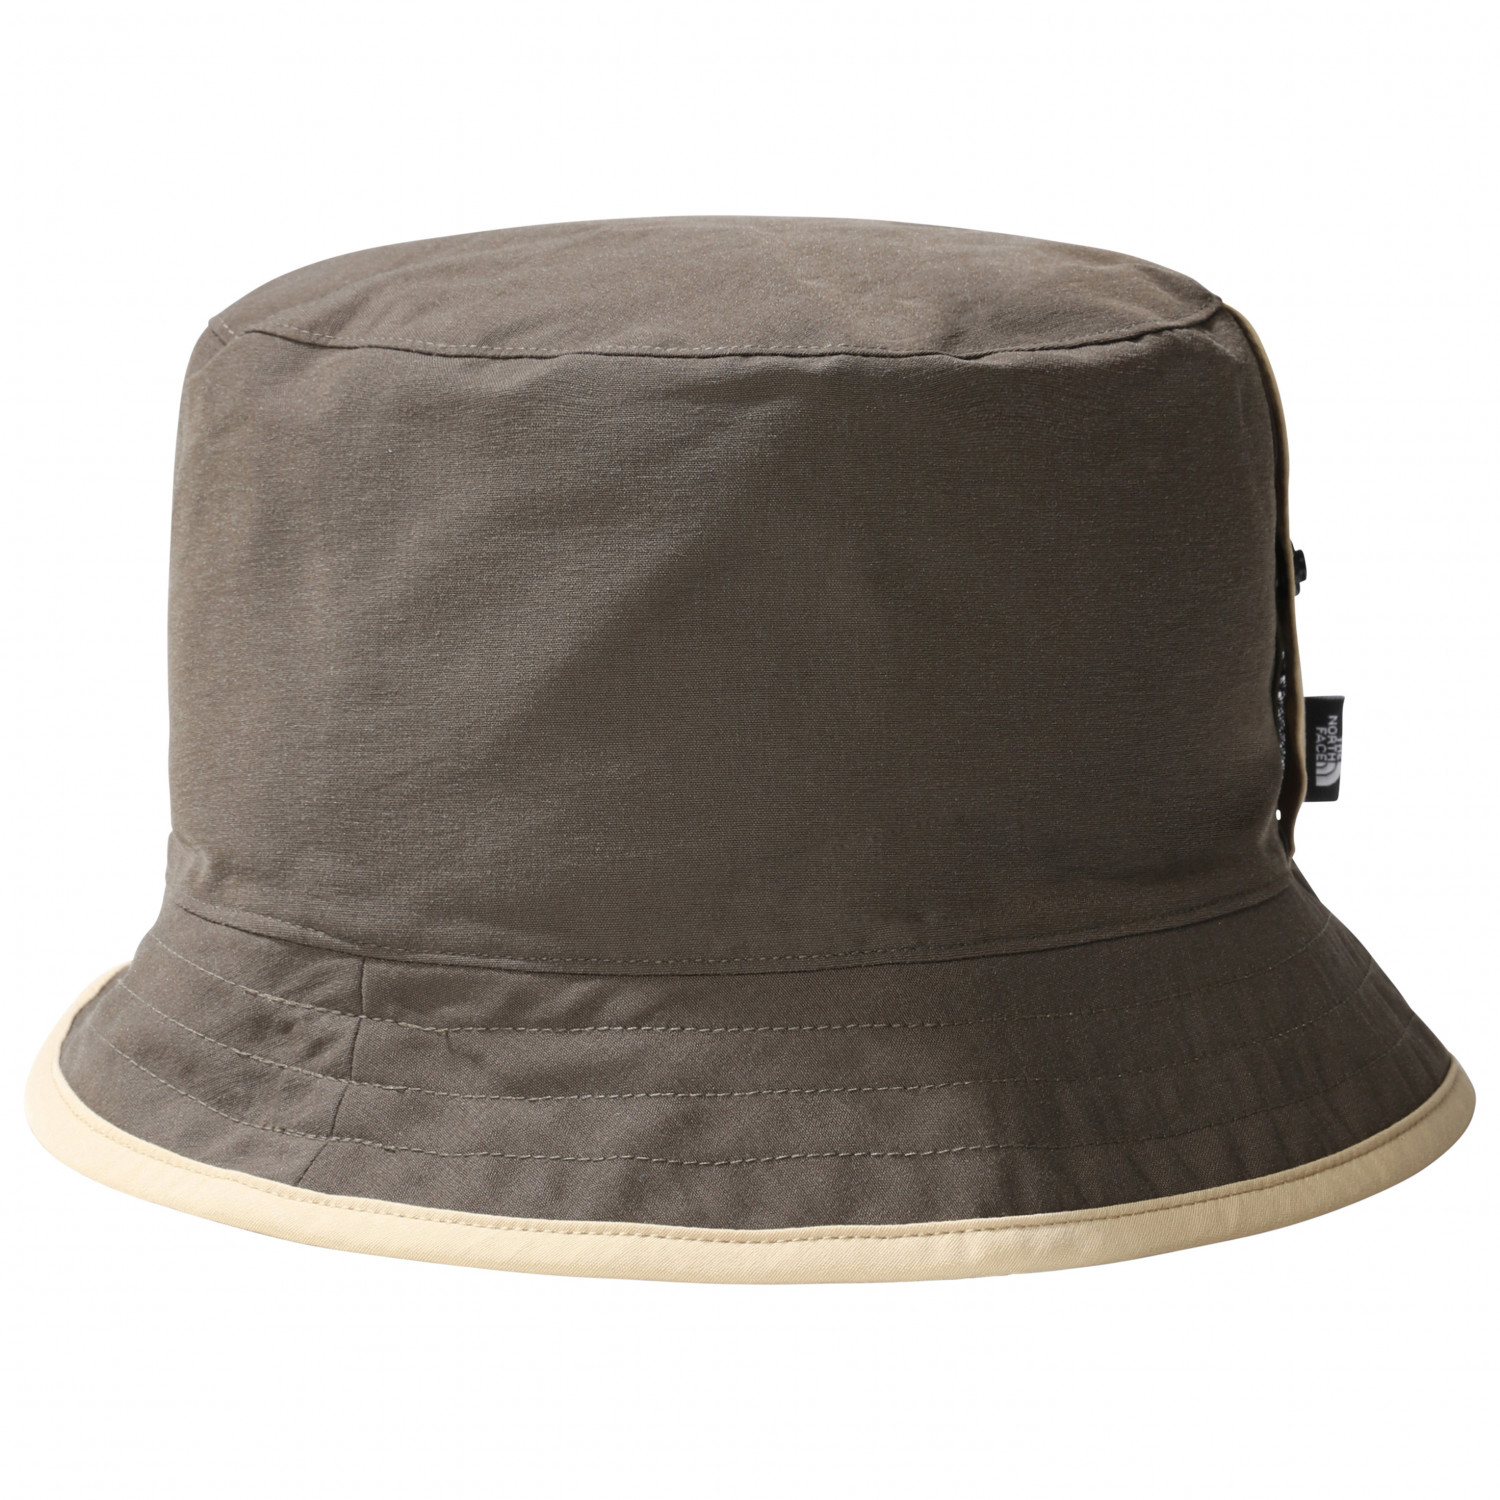 Кепка The North Face Class V Reversible Bucket Hat, цвет New Taupe Green/Khaki Stone куртка the north face w ins arctic mtn jkt new taupe gree женщины t93yu821l s